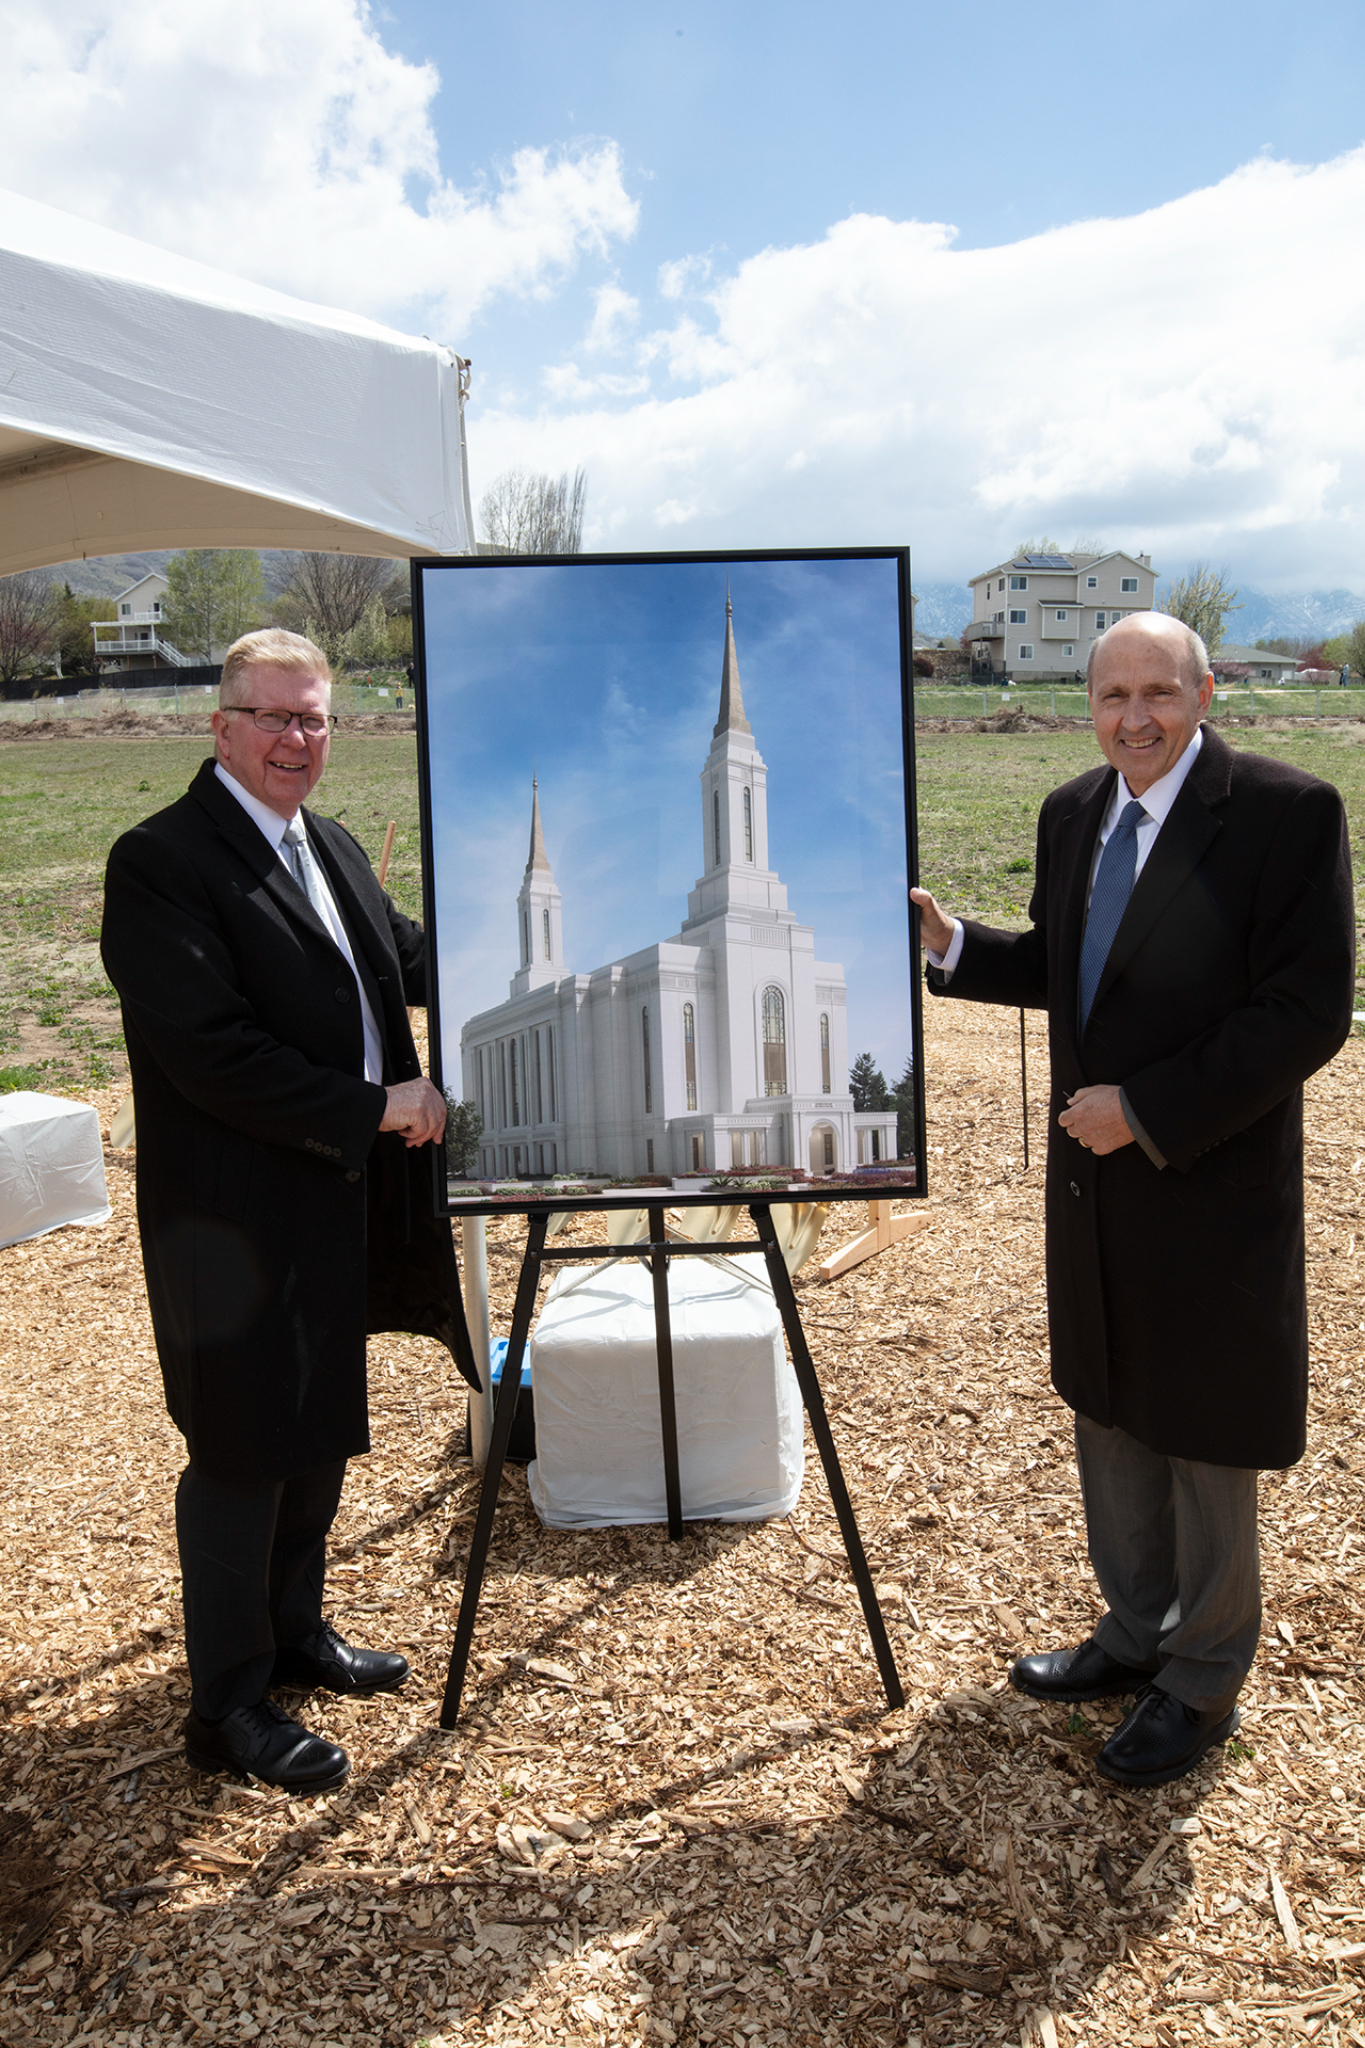 Two men in suits and ties standing next to a picture frame with a picture of the Lindon temple rendering inside.